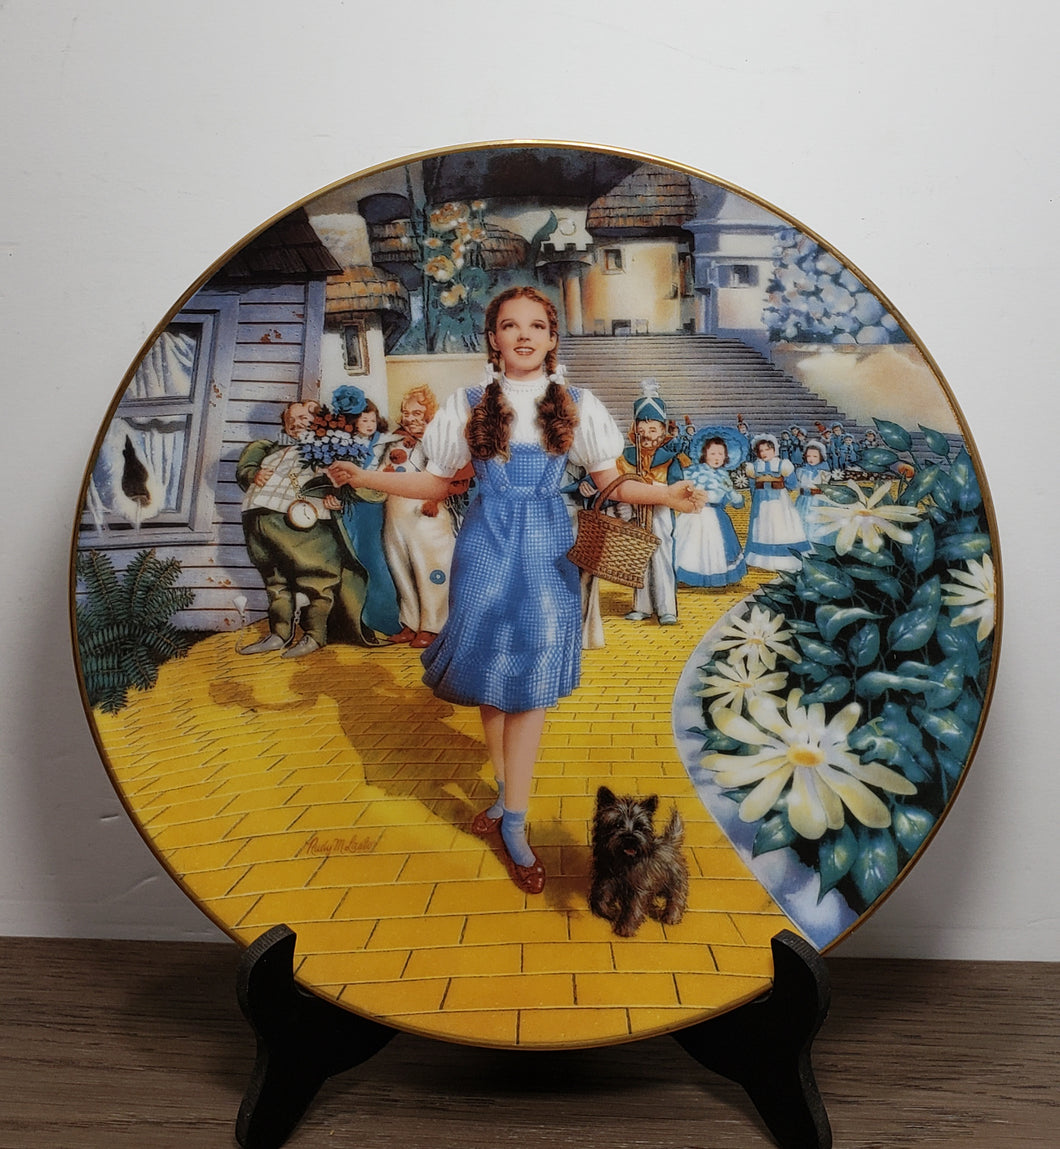 1991 The Wizard of Oz Plate 